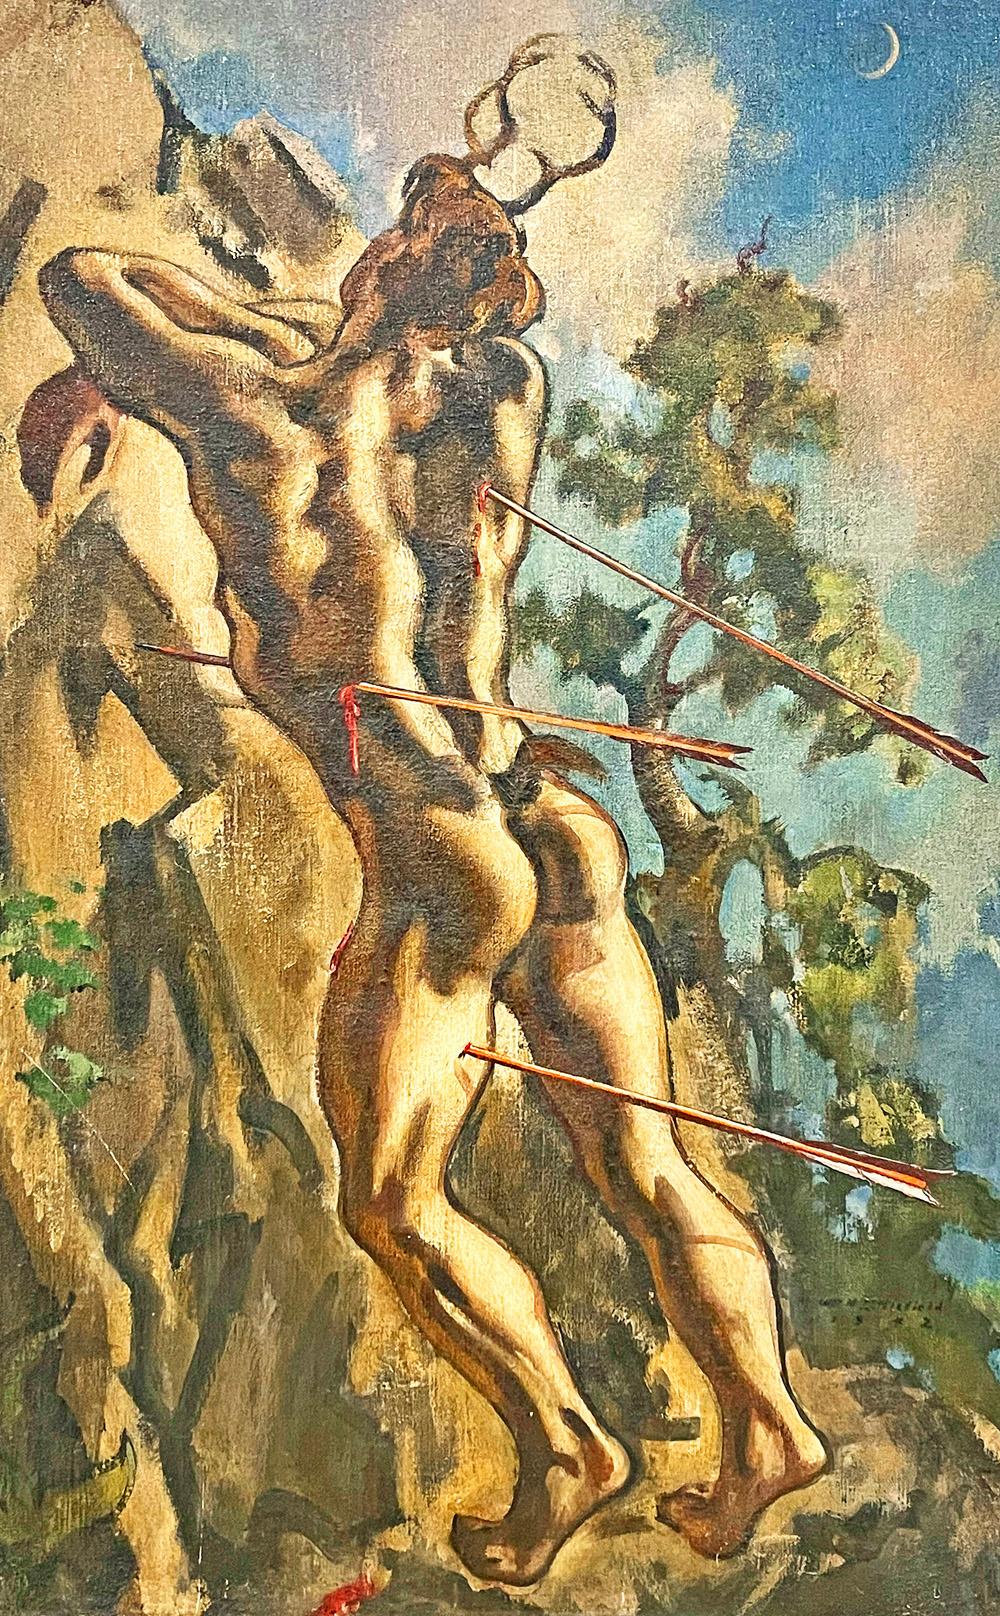 This stunning example of Art Deco painting illustrates the dramatic moment when the hunter Actaeon, having seen the nude Diana in her bath, is meeting his death. Here Actaeon himself is fully nude, and is being transformed into a deer as he is being